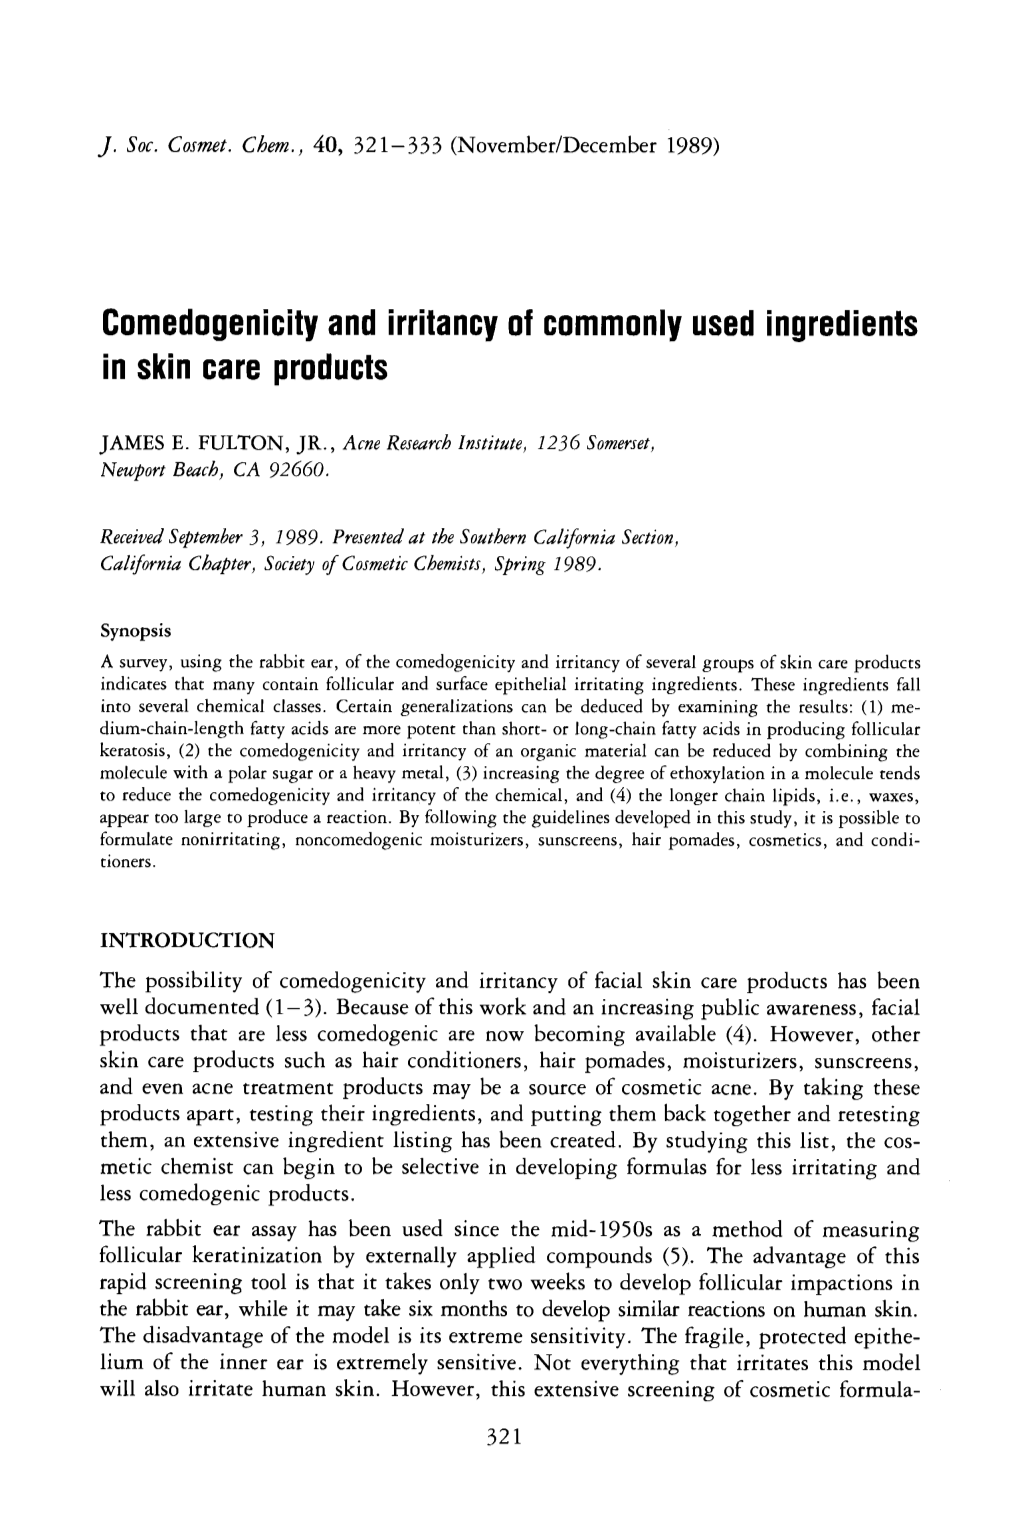 Comedogenicity and Irritancy of Commonly Used Ingredients